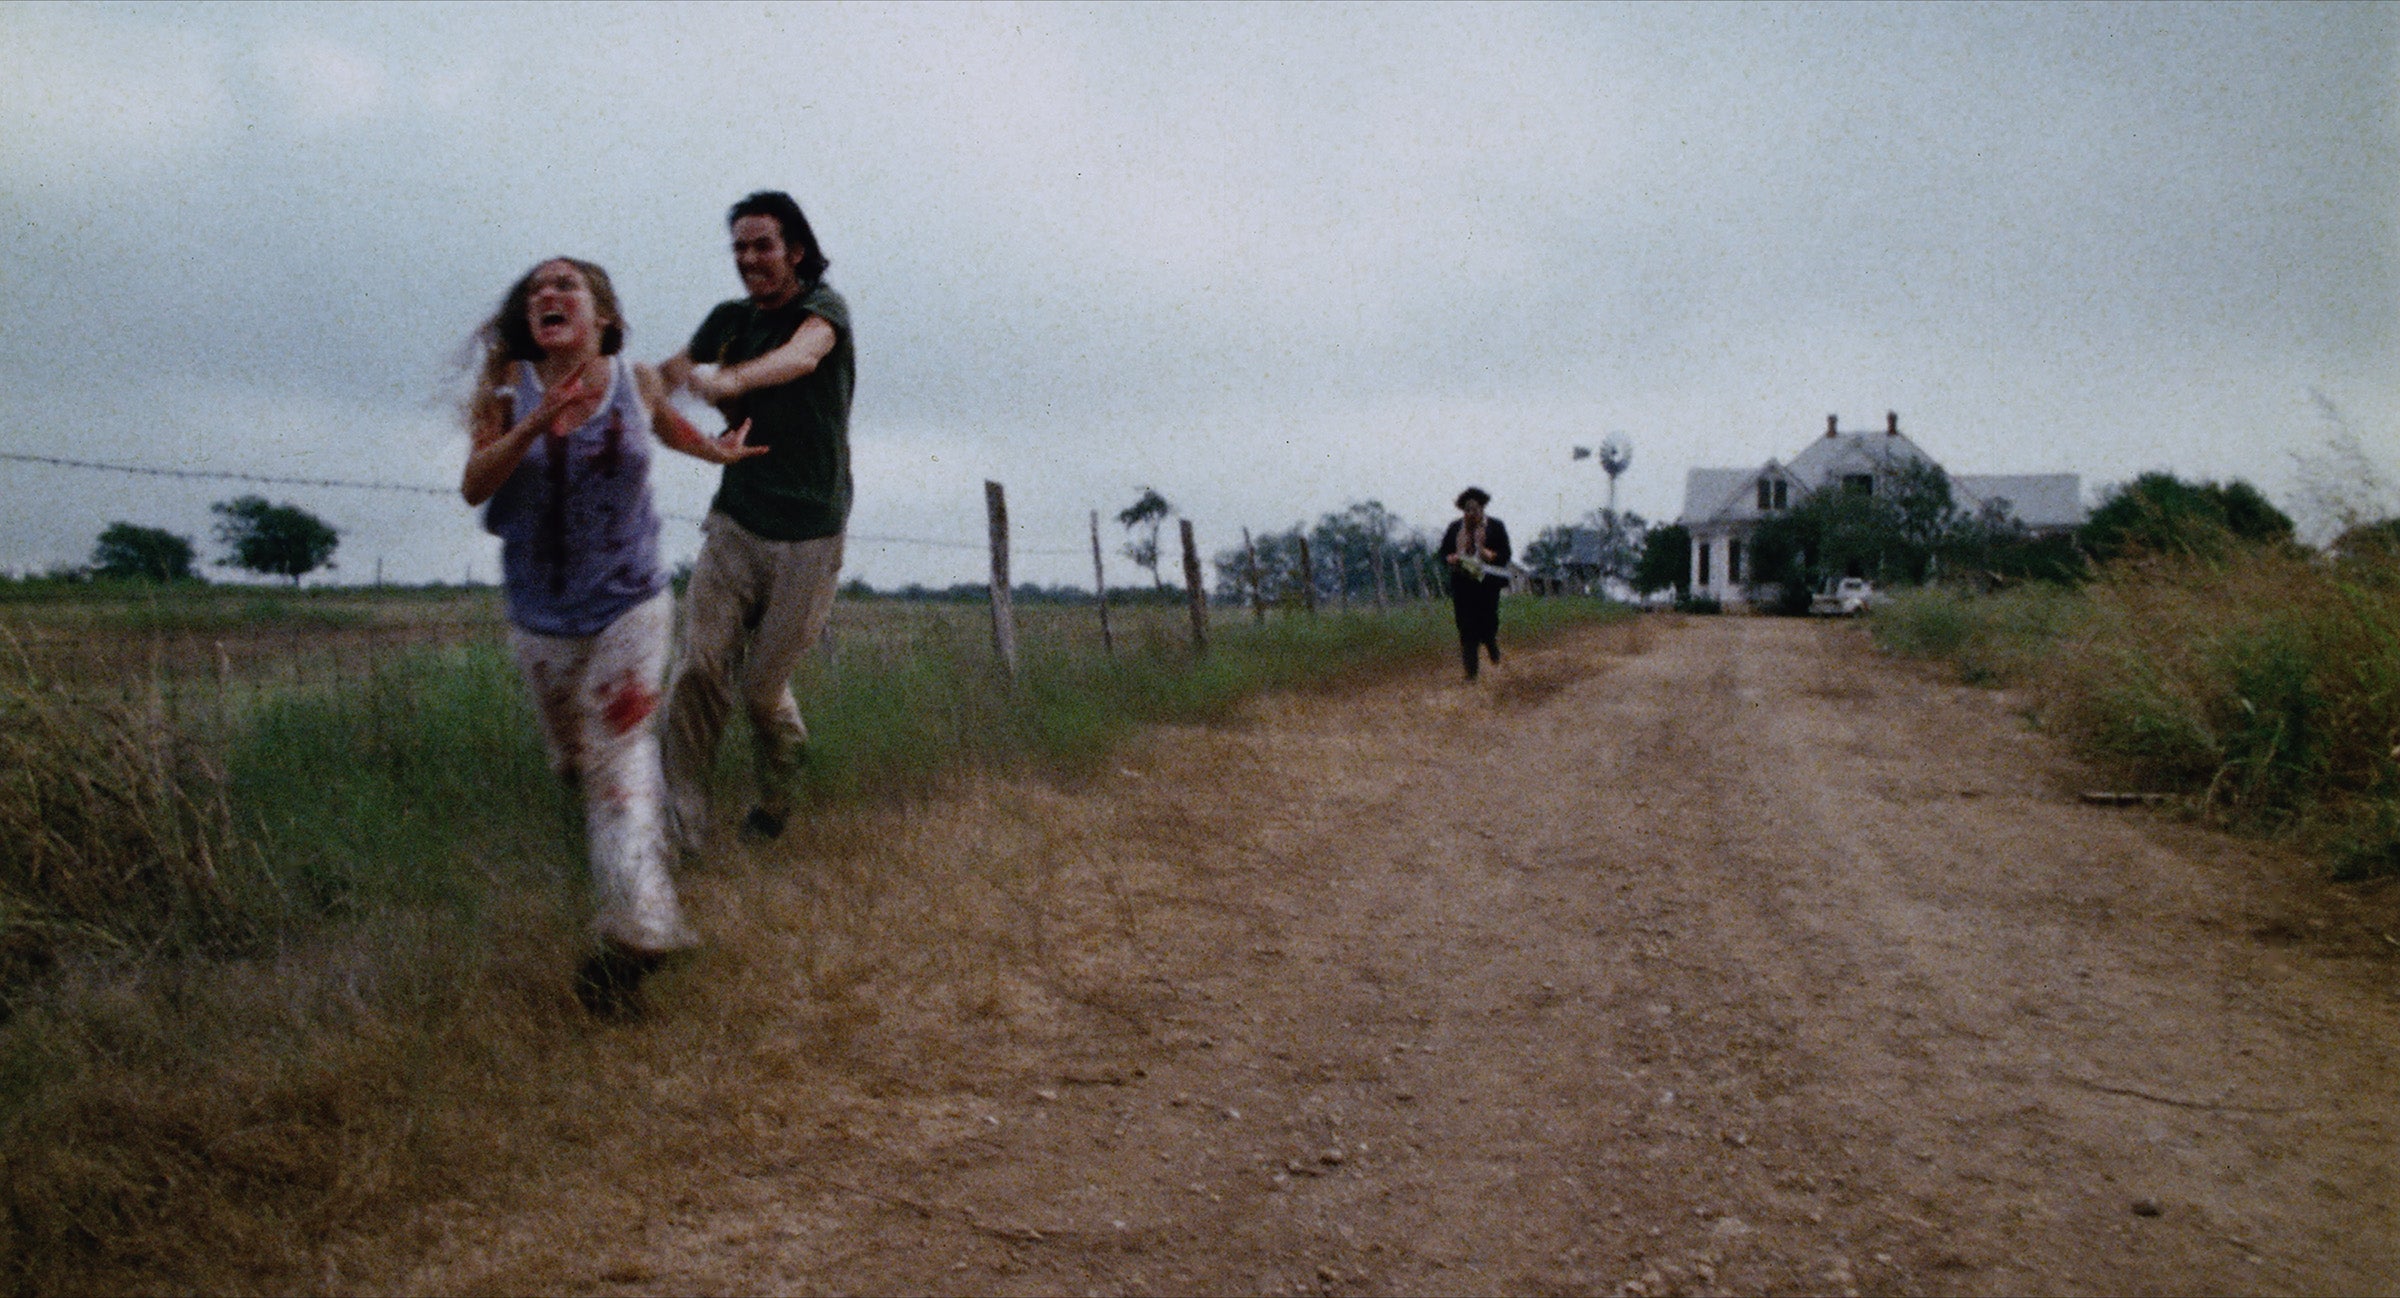 The Texas Chainsaw Massacre by Tobe Hooper